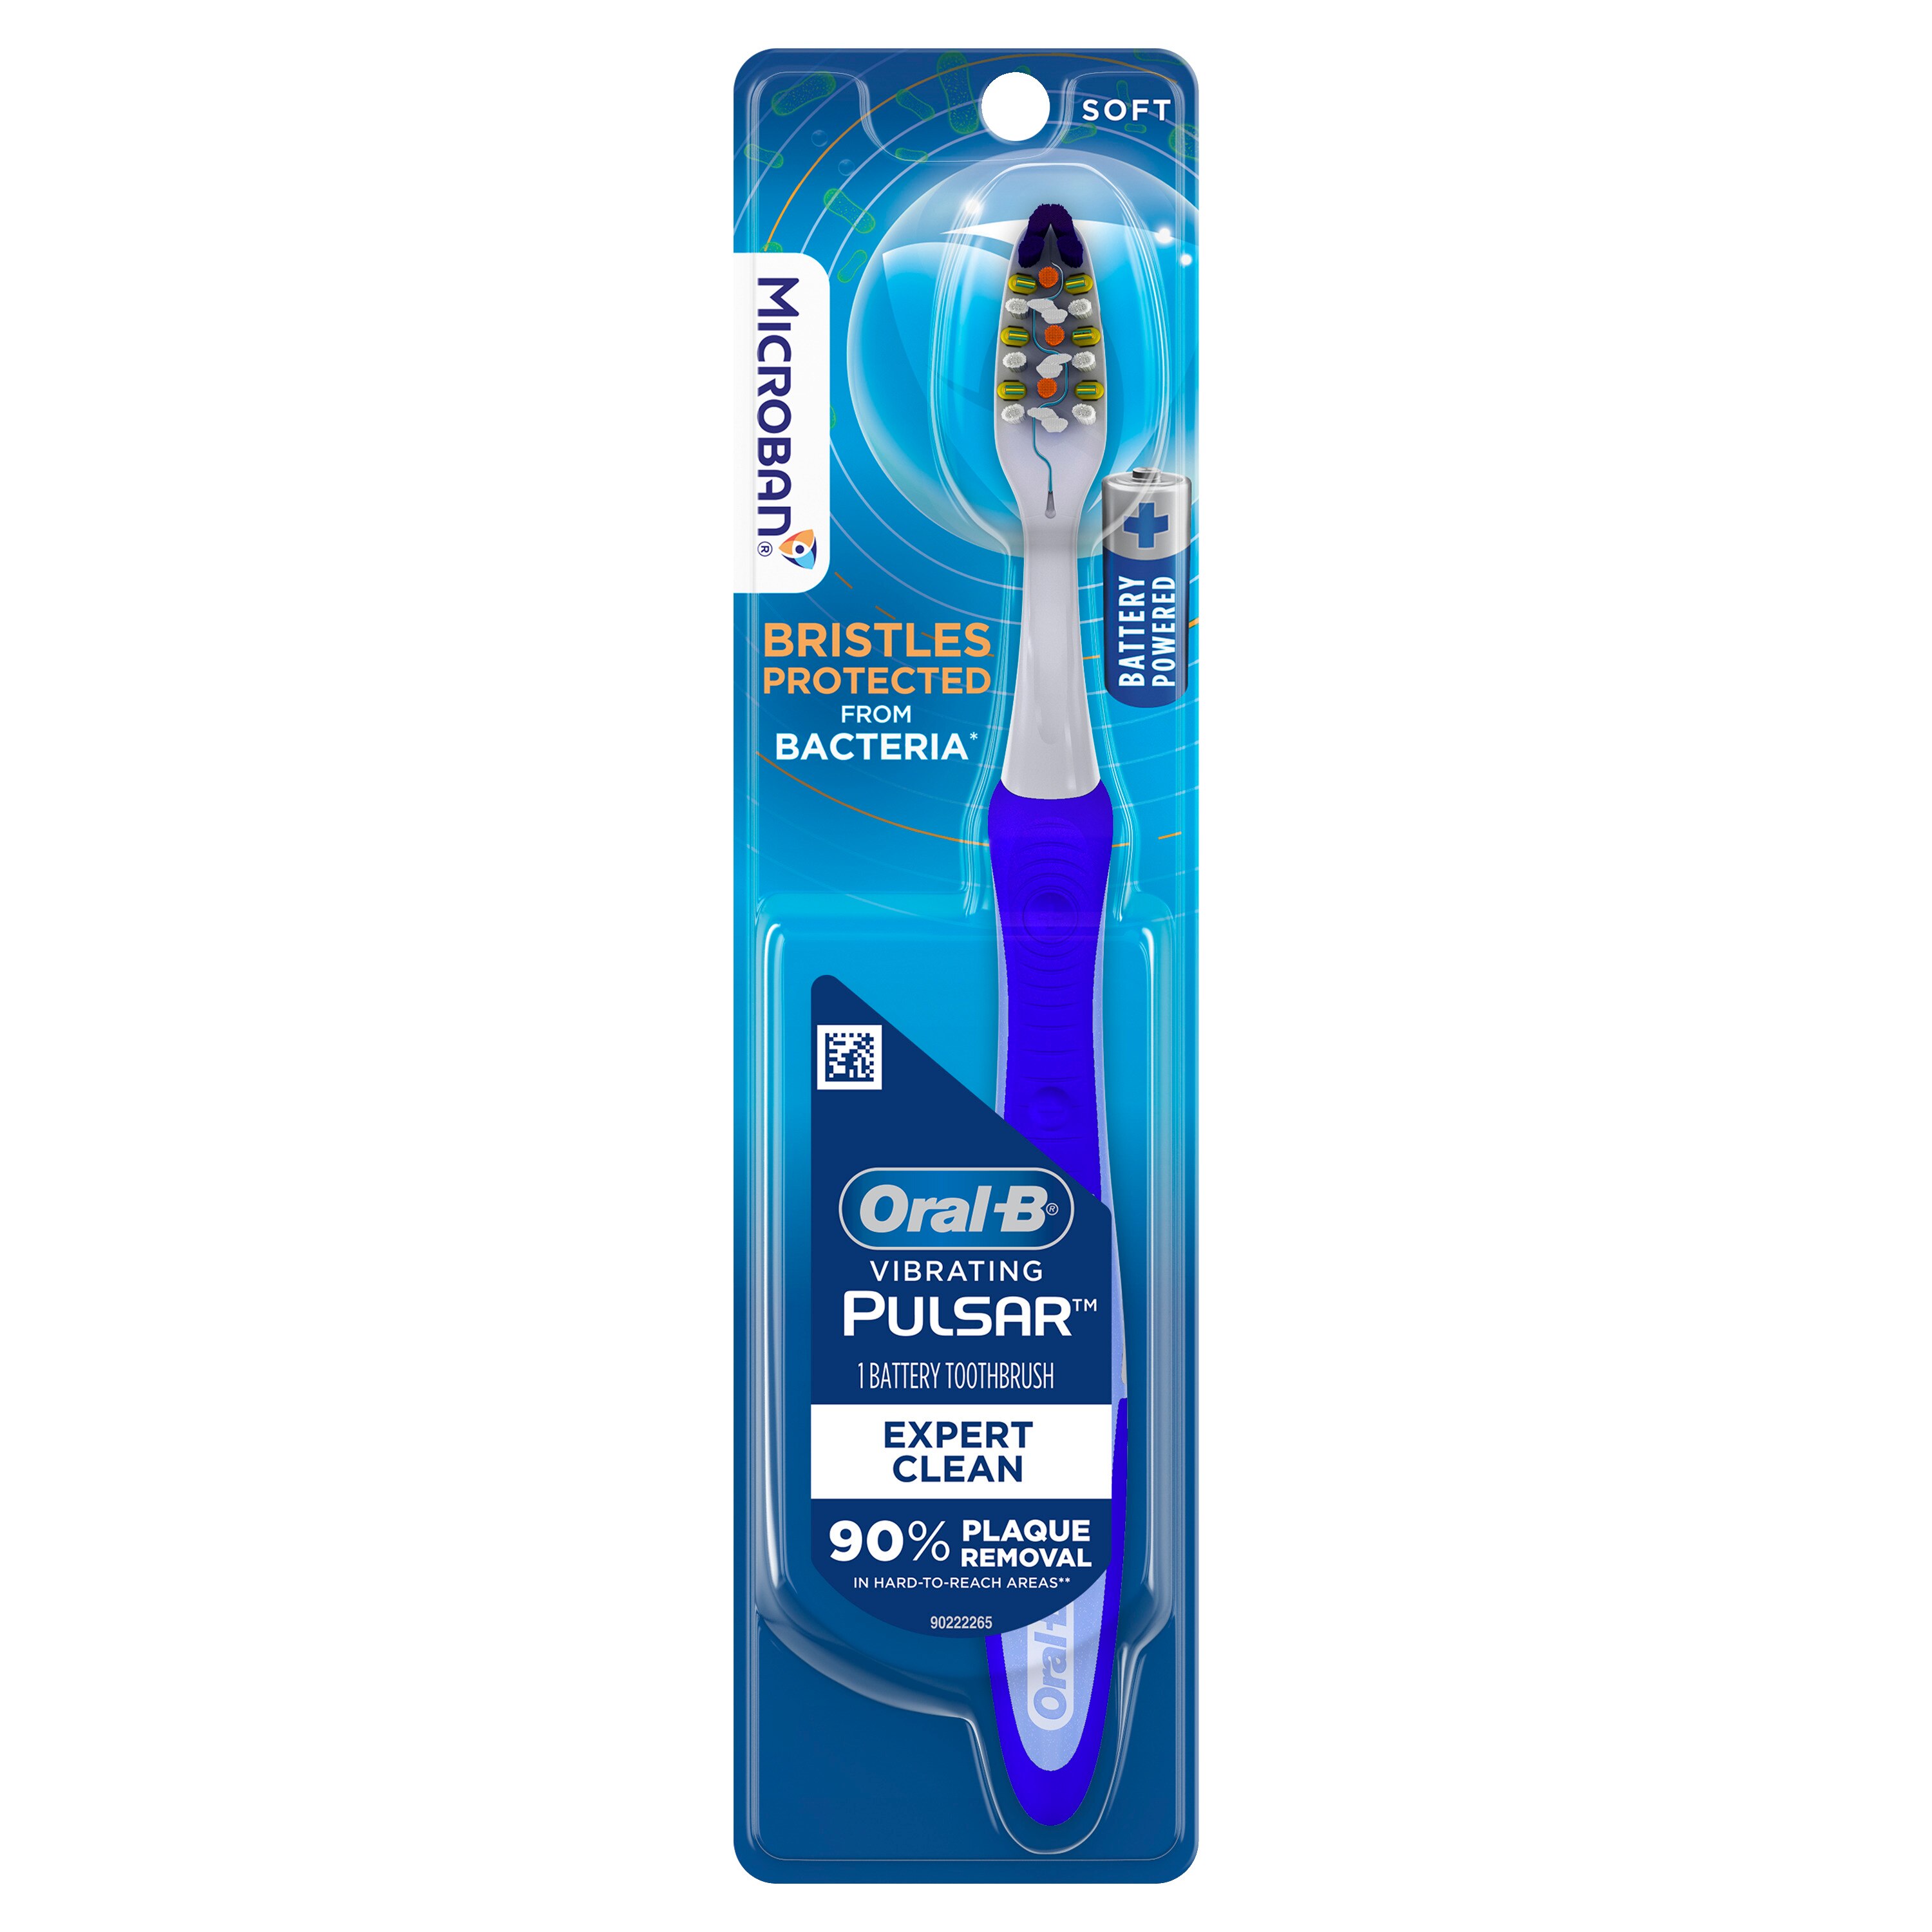 Oral-B Vibrating Pulsar Expert Clean Battery Toothbrush